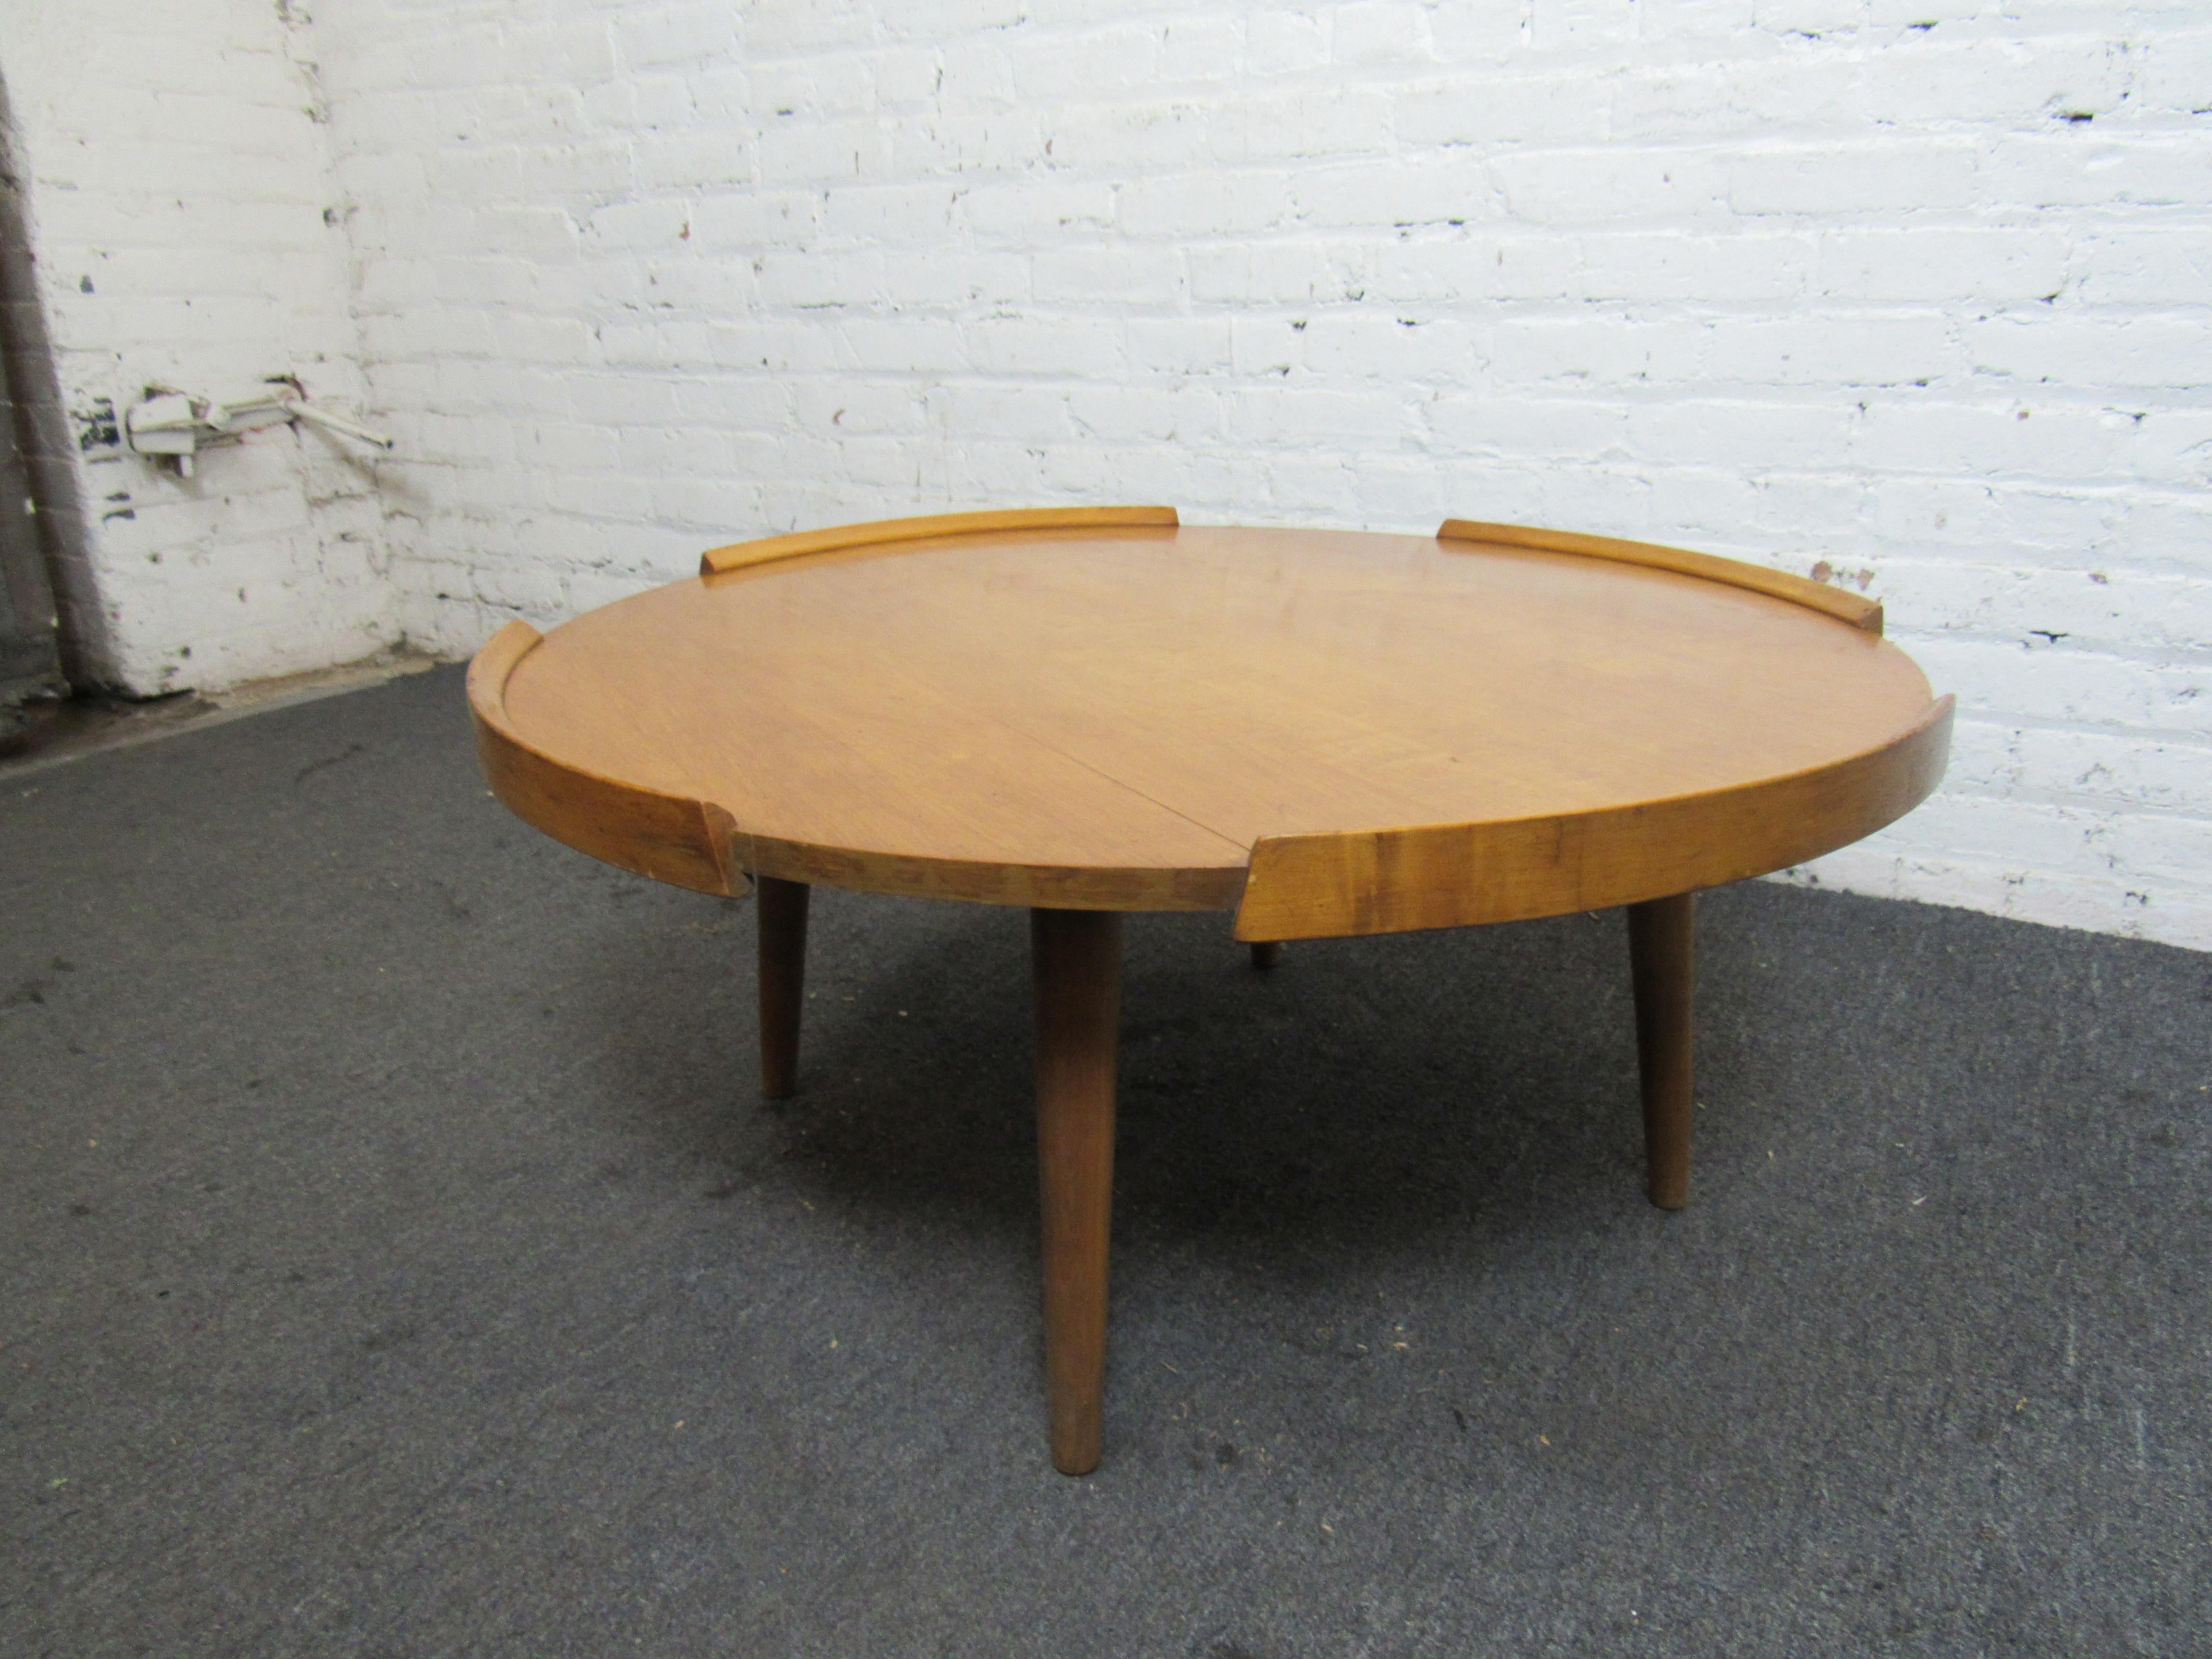 Unique mid-century coffee table with side flares. Built from beautiful maple wood which is less common for century pieces. 
(Please confirm item location - NY or NJ - with dealer).
 